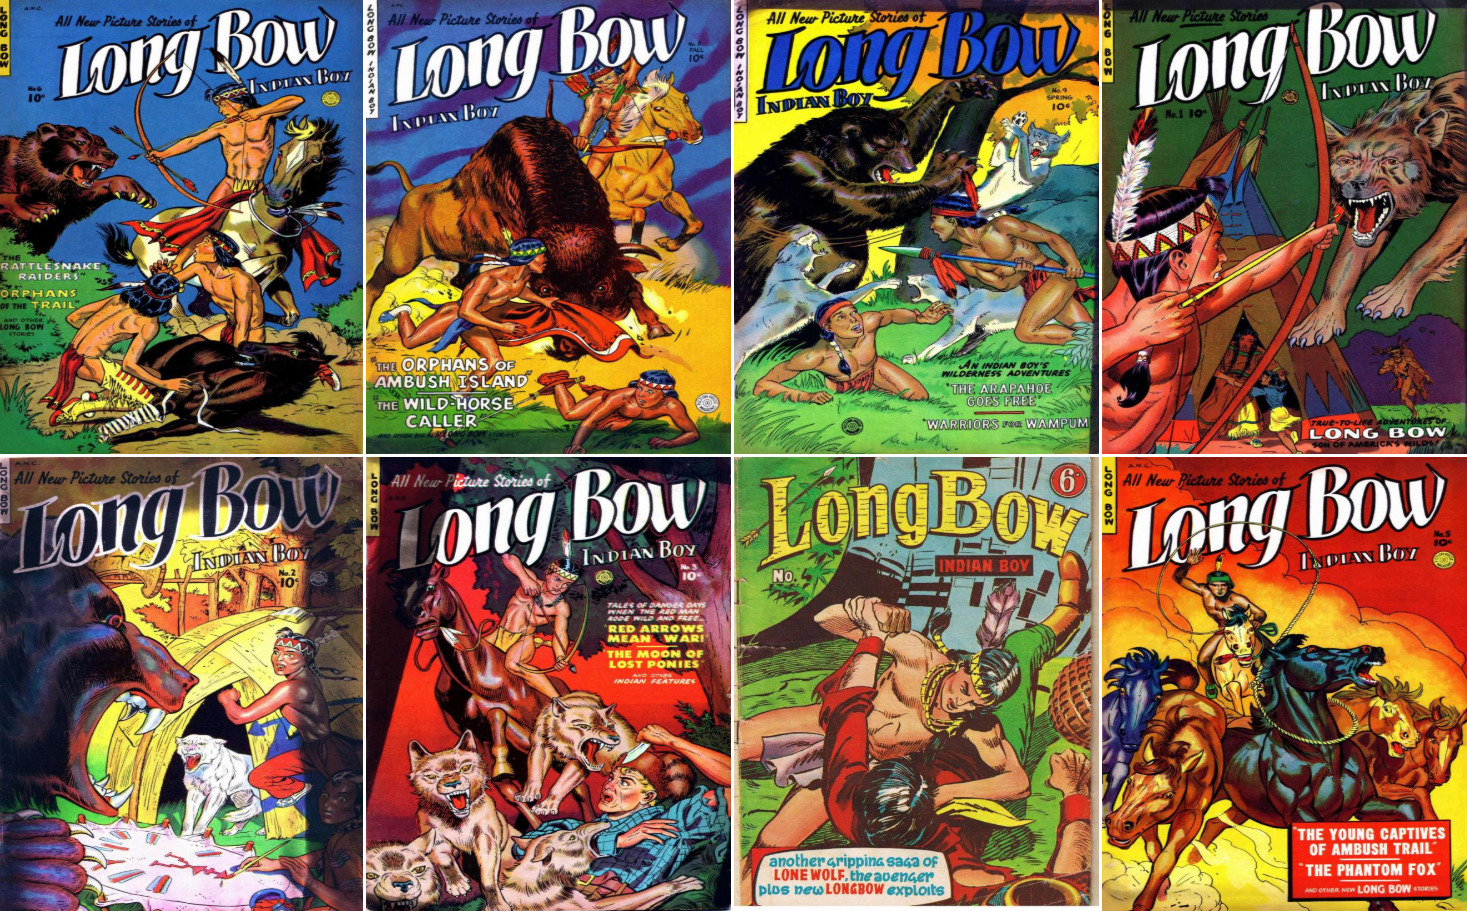 1950's - 1960's Long Bow Indian Boy Comic Book Package - 9 eBooks on CD